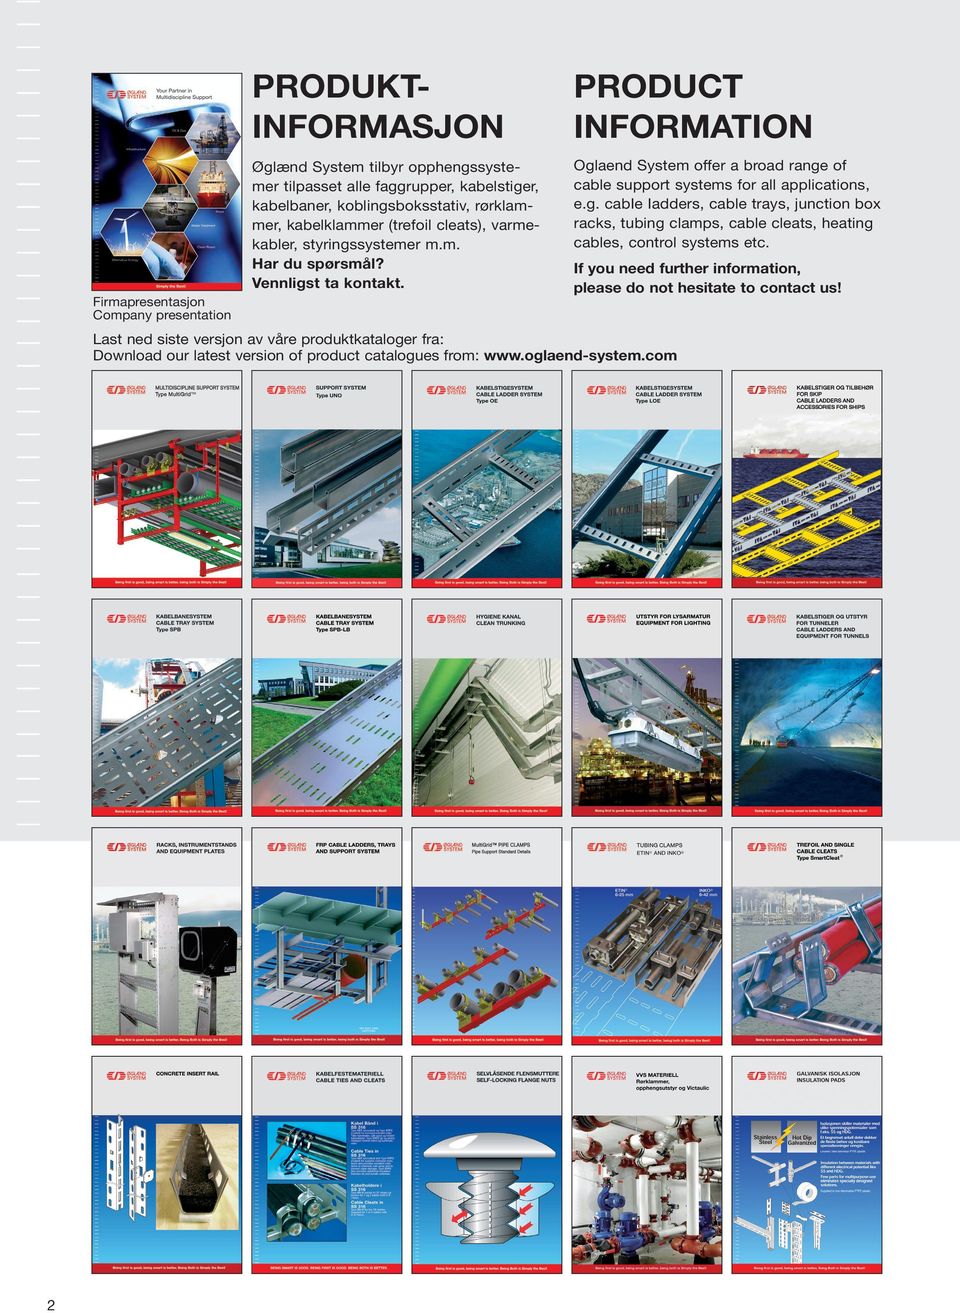 Oglaend System offer a broad range of cable support systems for all applications, e.g. cabie Iadders, cable trays, junction box racks, tubing clamps, cable cleats, heating cables, control systems etc.